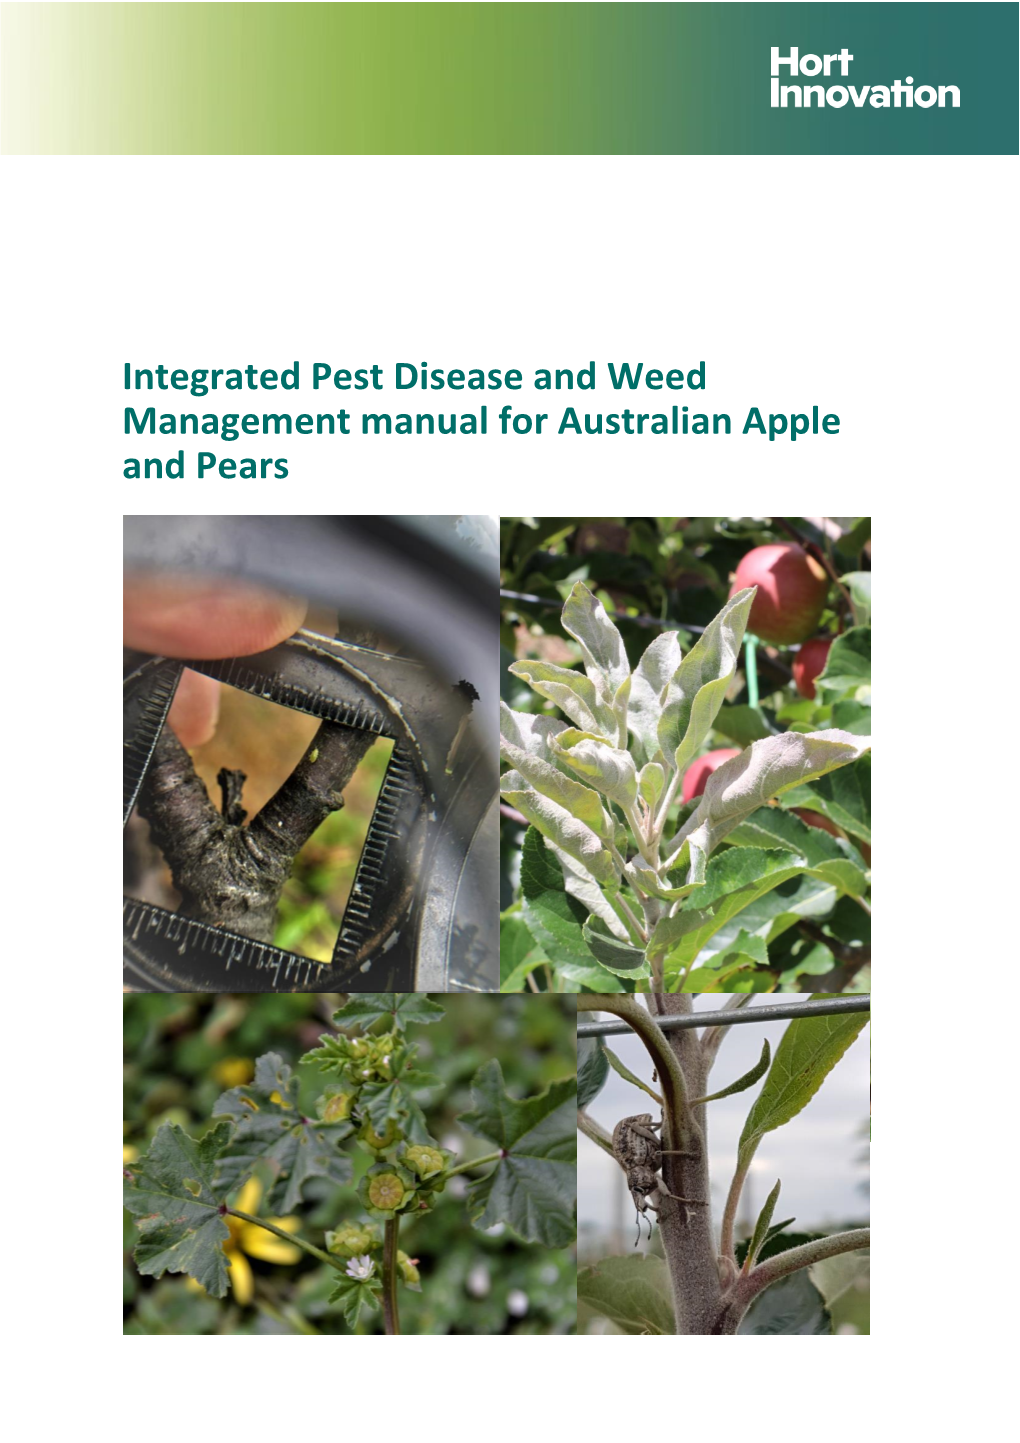 Integrated Pest Disease and Weed Management Manual for Australian Apple and Pears